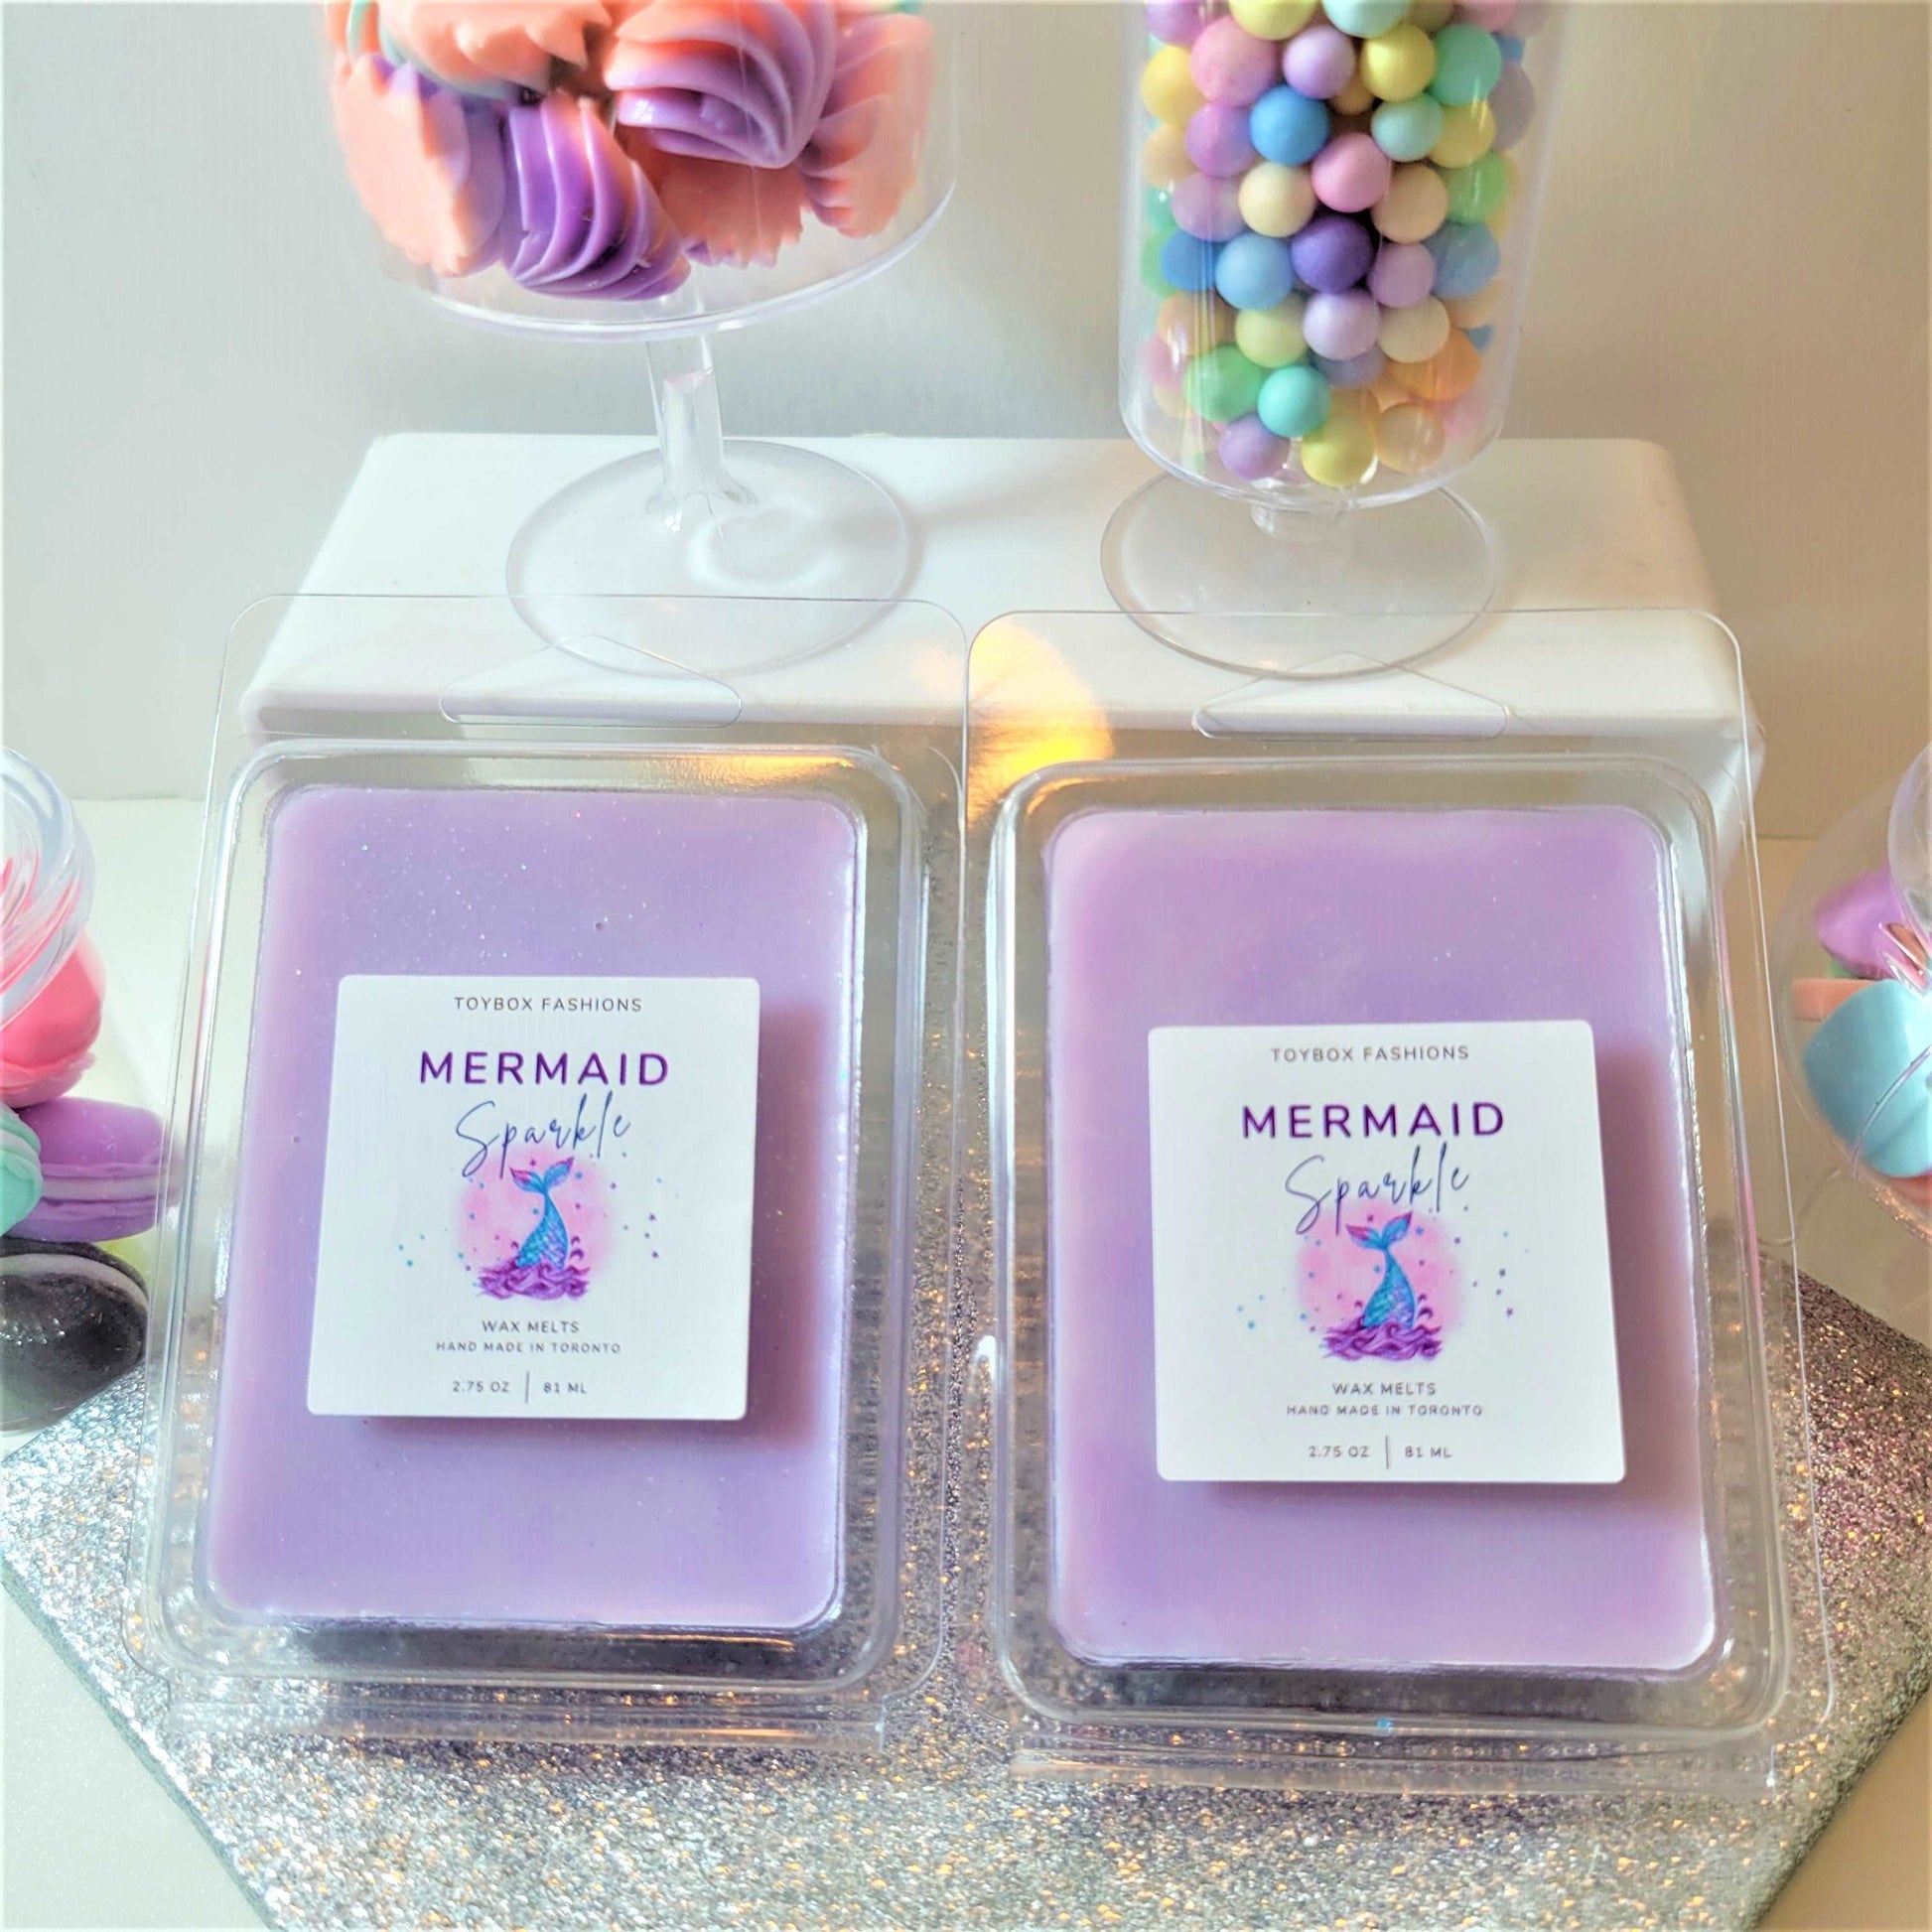 Cafe Delights Cotton Candy Floss Scented Soy Wax Melts Bar 81 ml/ 2.7 oz